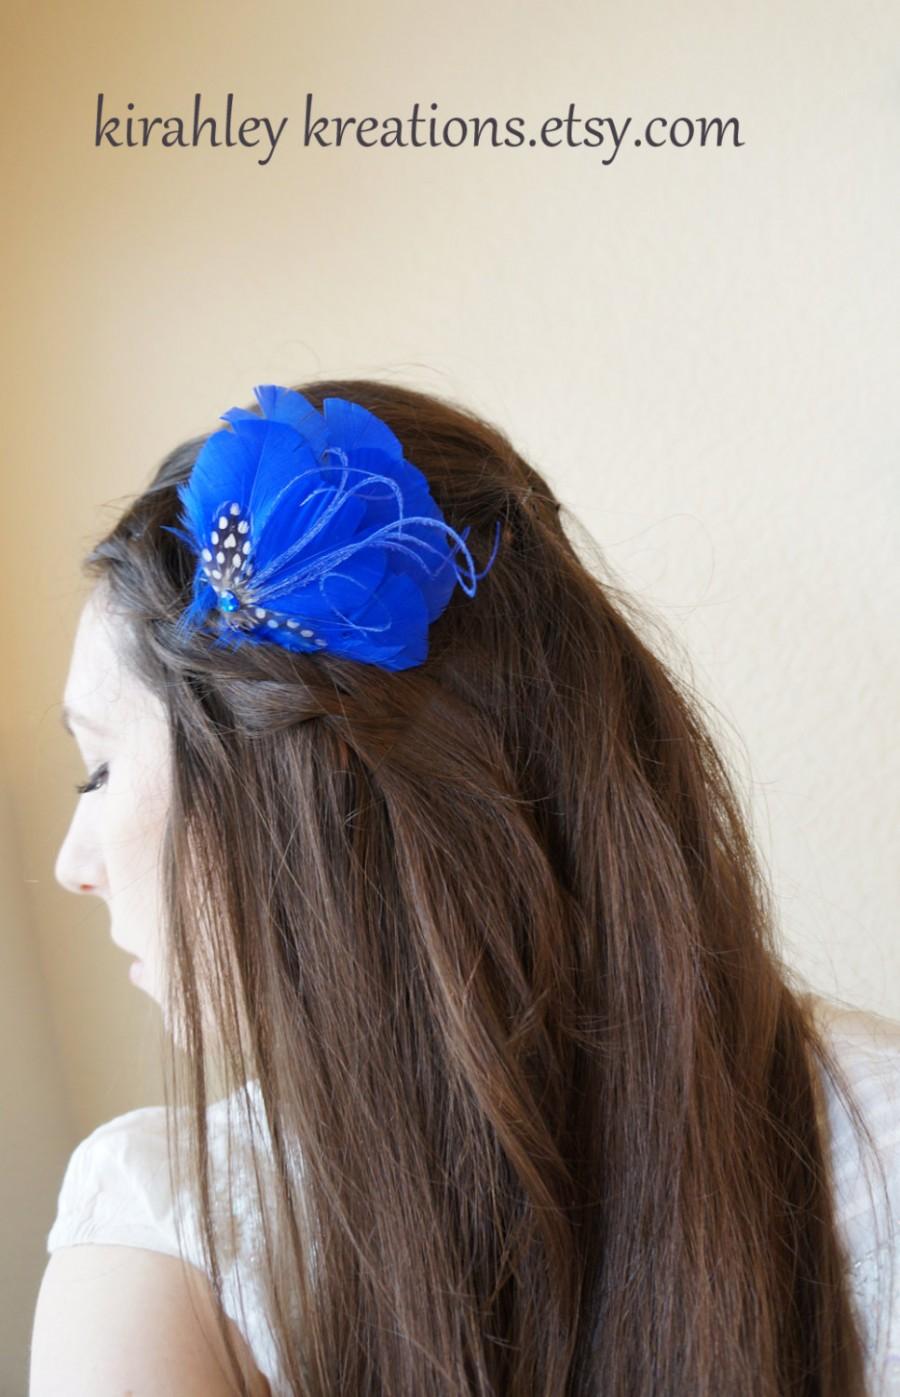 Wedding - Royal Cobalt Something BLUE BETTY Feather Fascinator Hairpiece Hair Clip Spotted Guinea Peacock Herl Jewel Bride Bridal Bridesmaid Prom